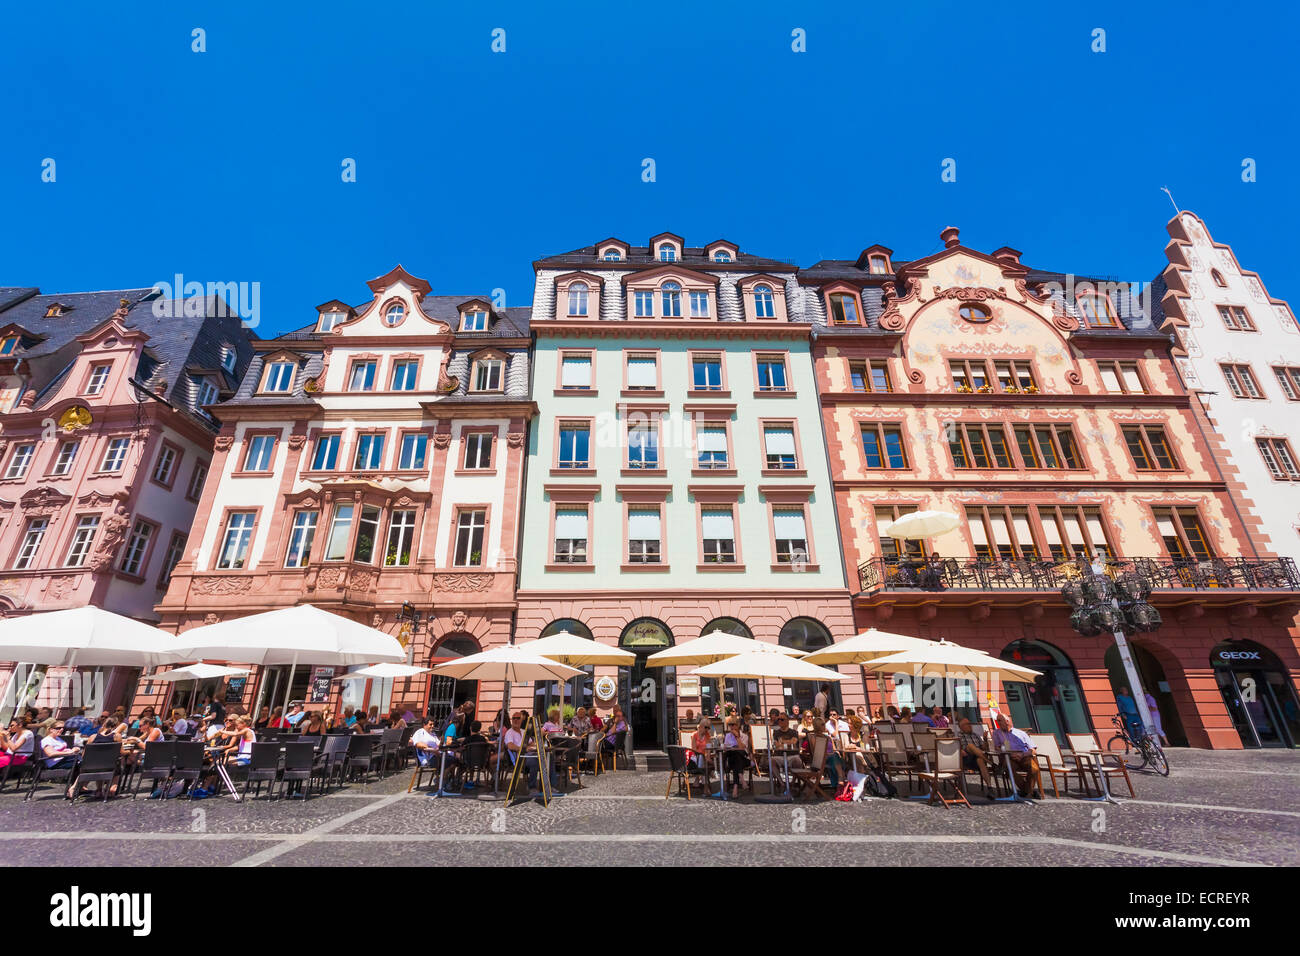 CAFES AND RESTAURANTS AT THE MARKETPLACE, OLD TOWN, MAINZ,  RHINELAND-PALATINATE, GERMANY Stock Photo - Alamy